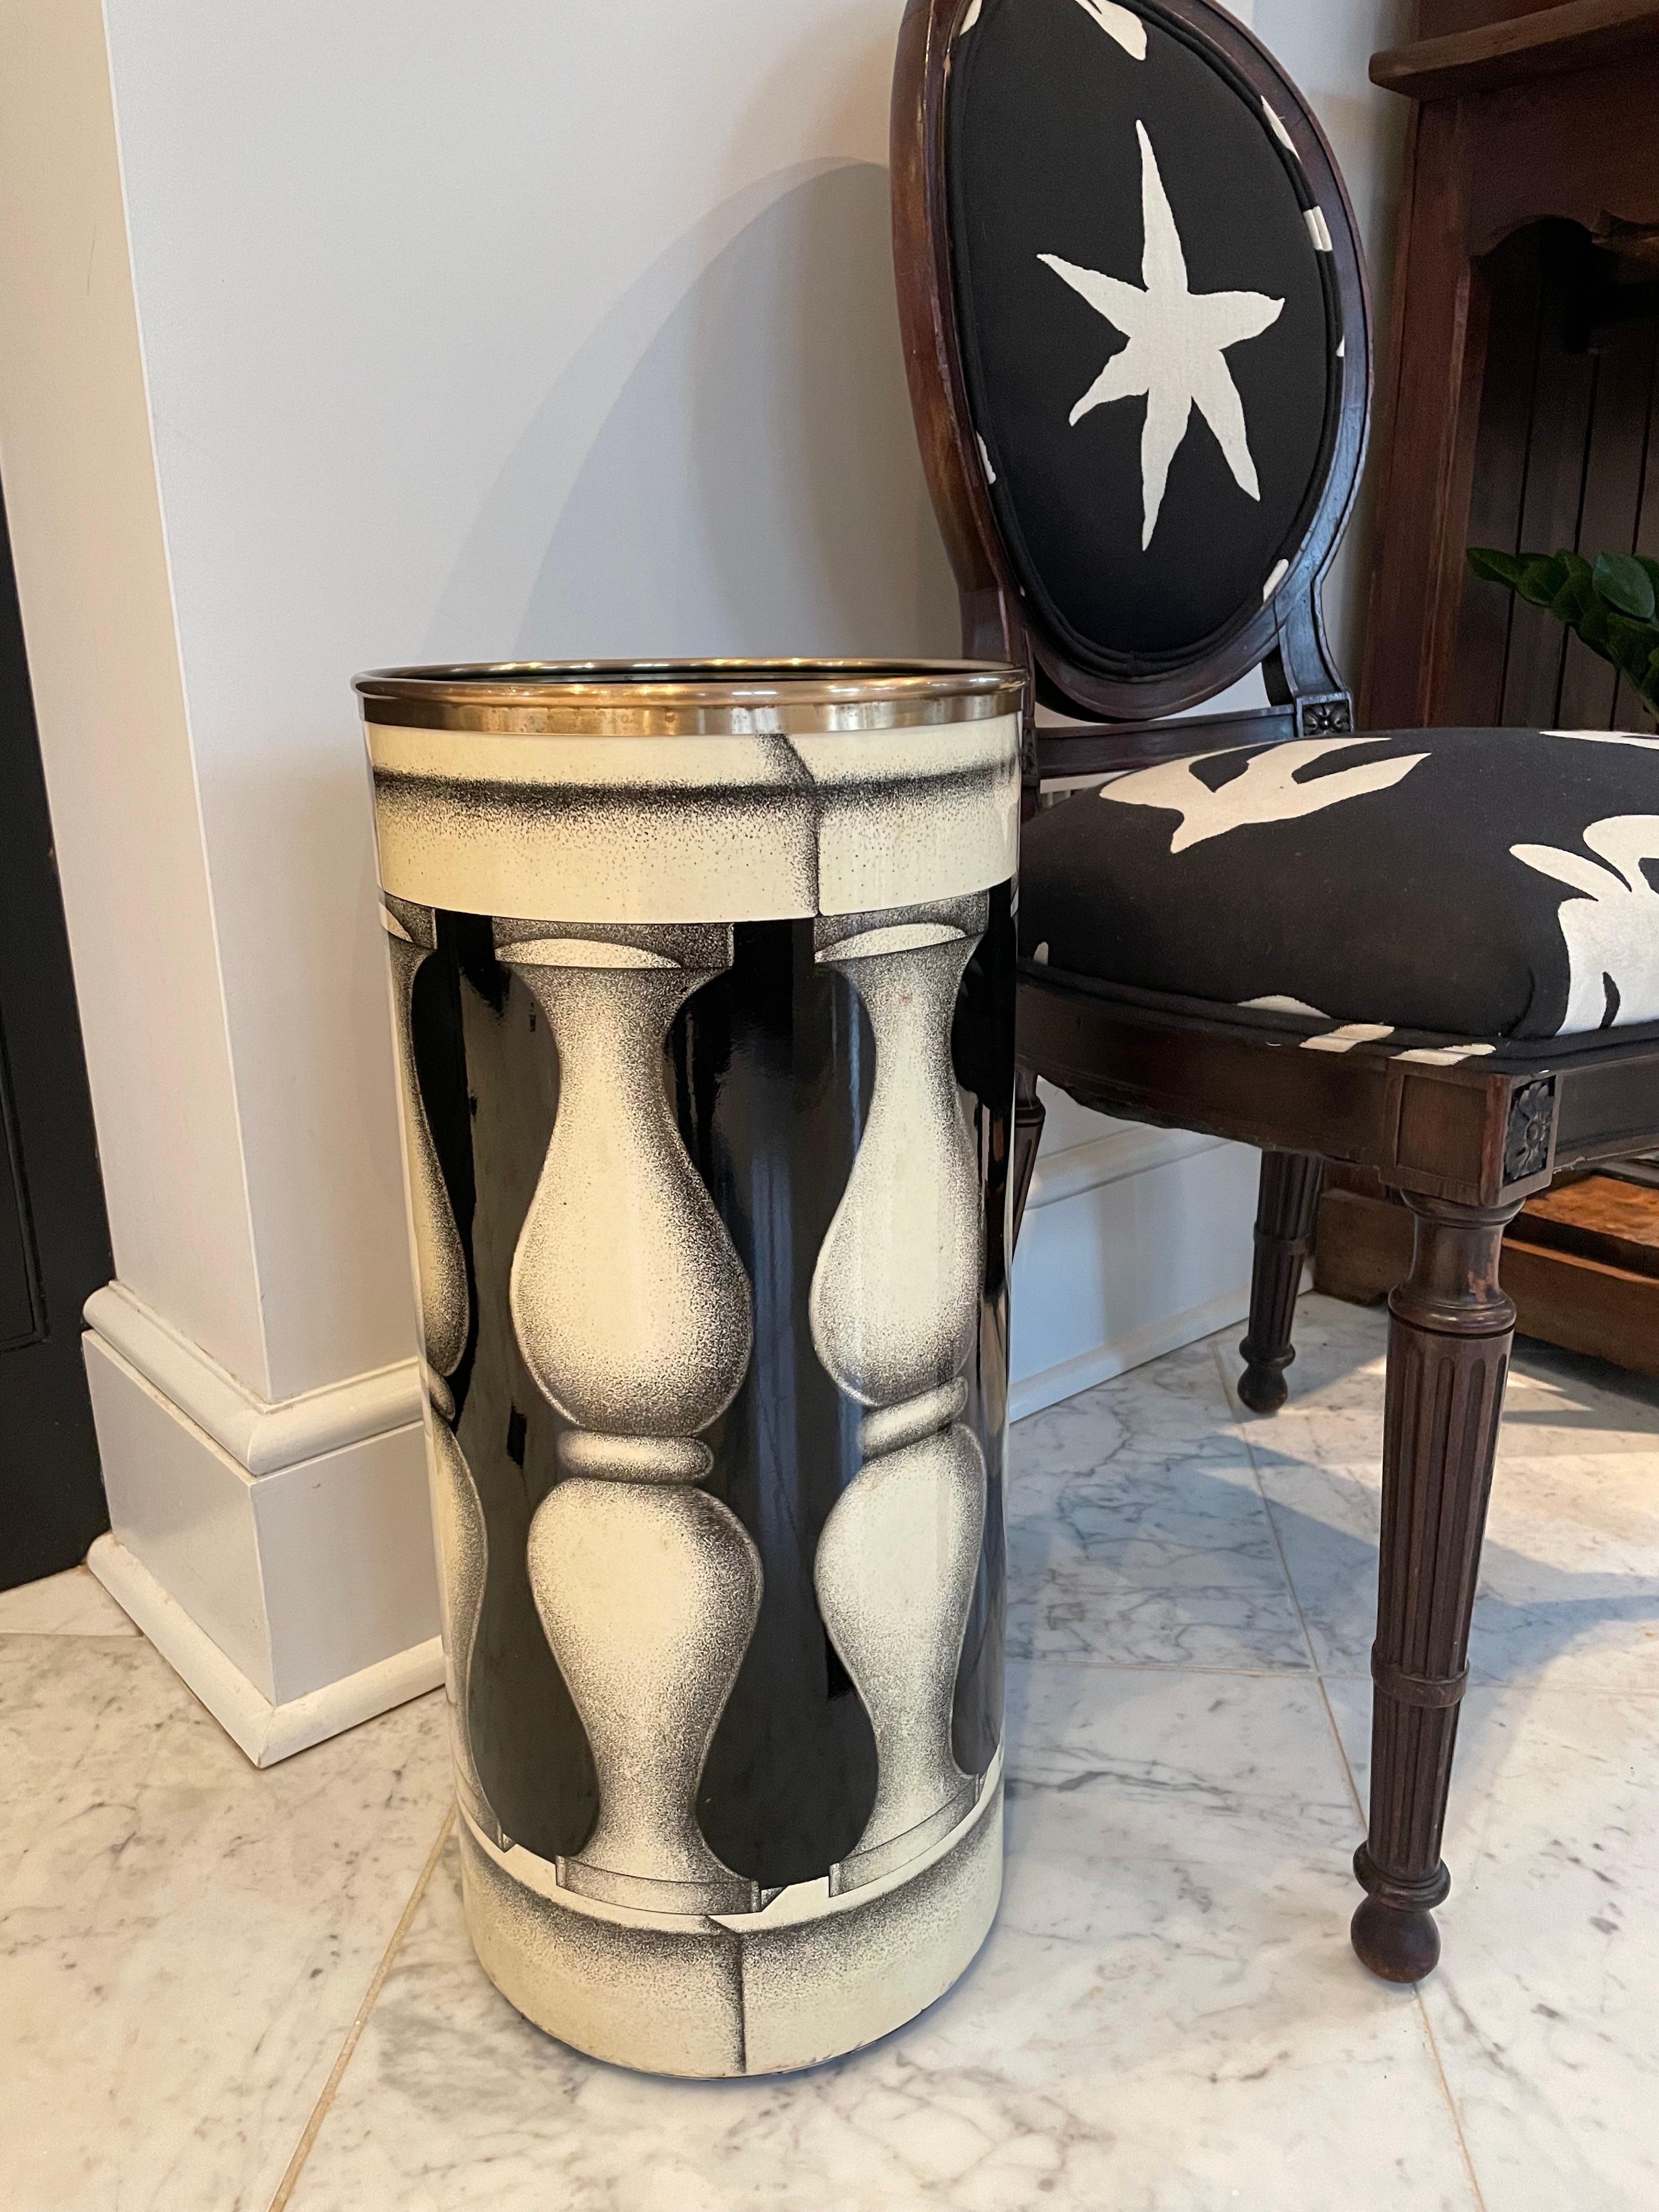 Very handsome and rare umbrella or cane stand by the iconic Piero Forrnasetti circa 1960 in Italy. The black and off white stand has a brass band around the top which creates a lip; this is a feature only found in early models. The striking baluster